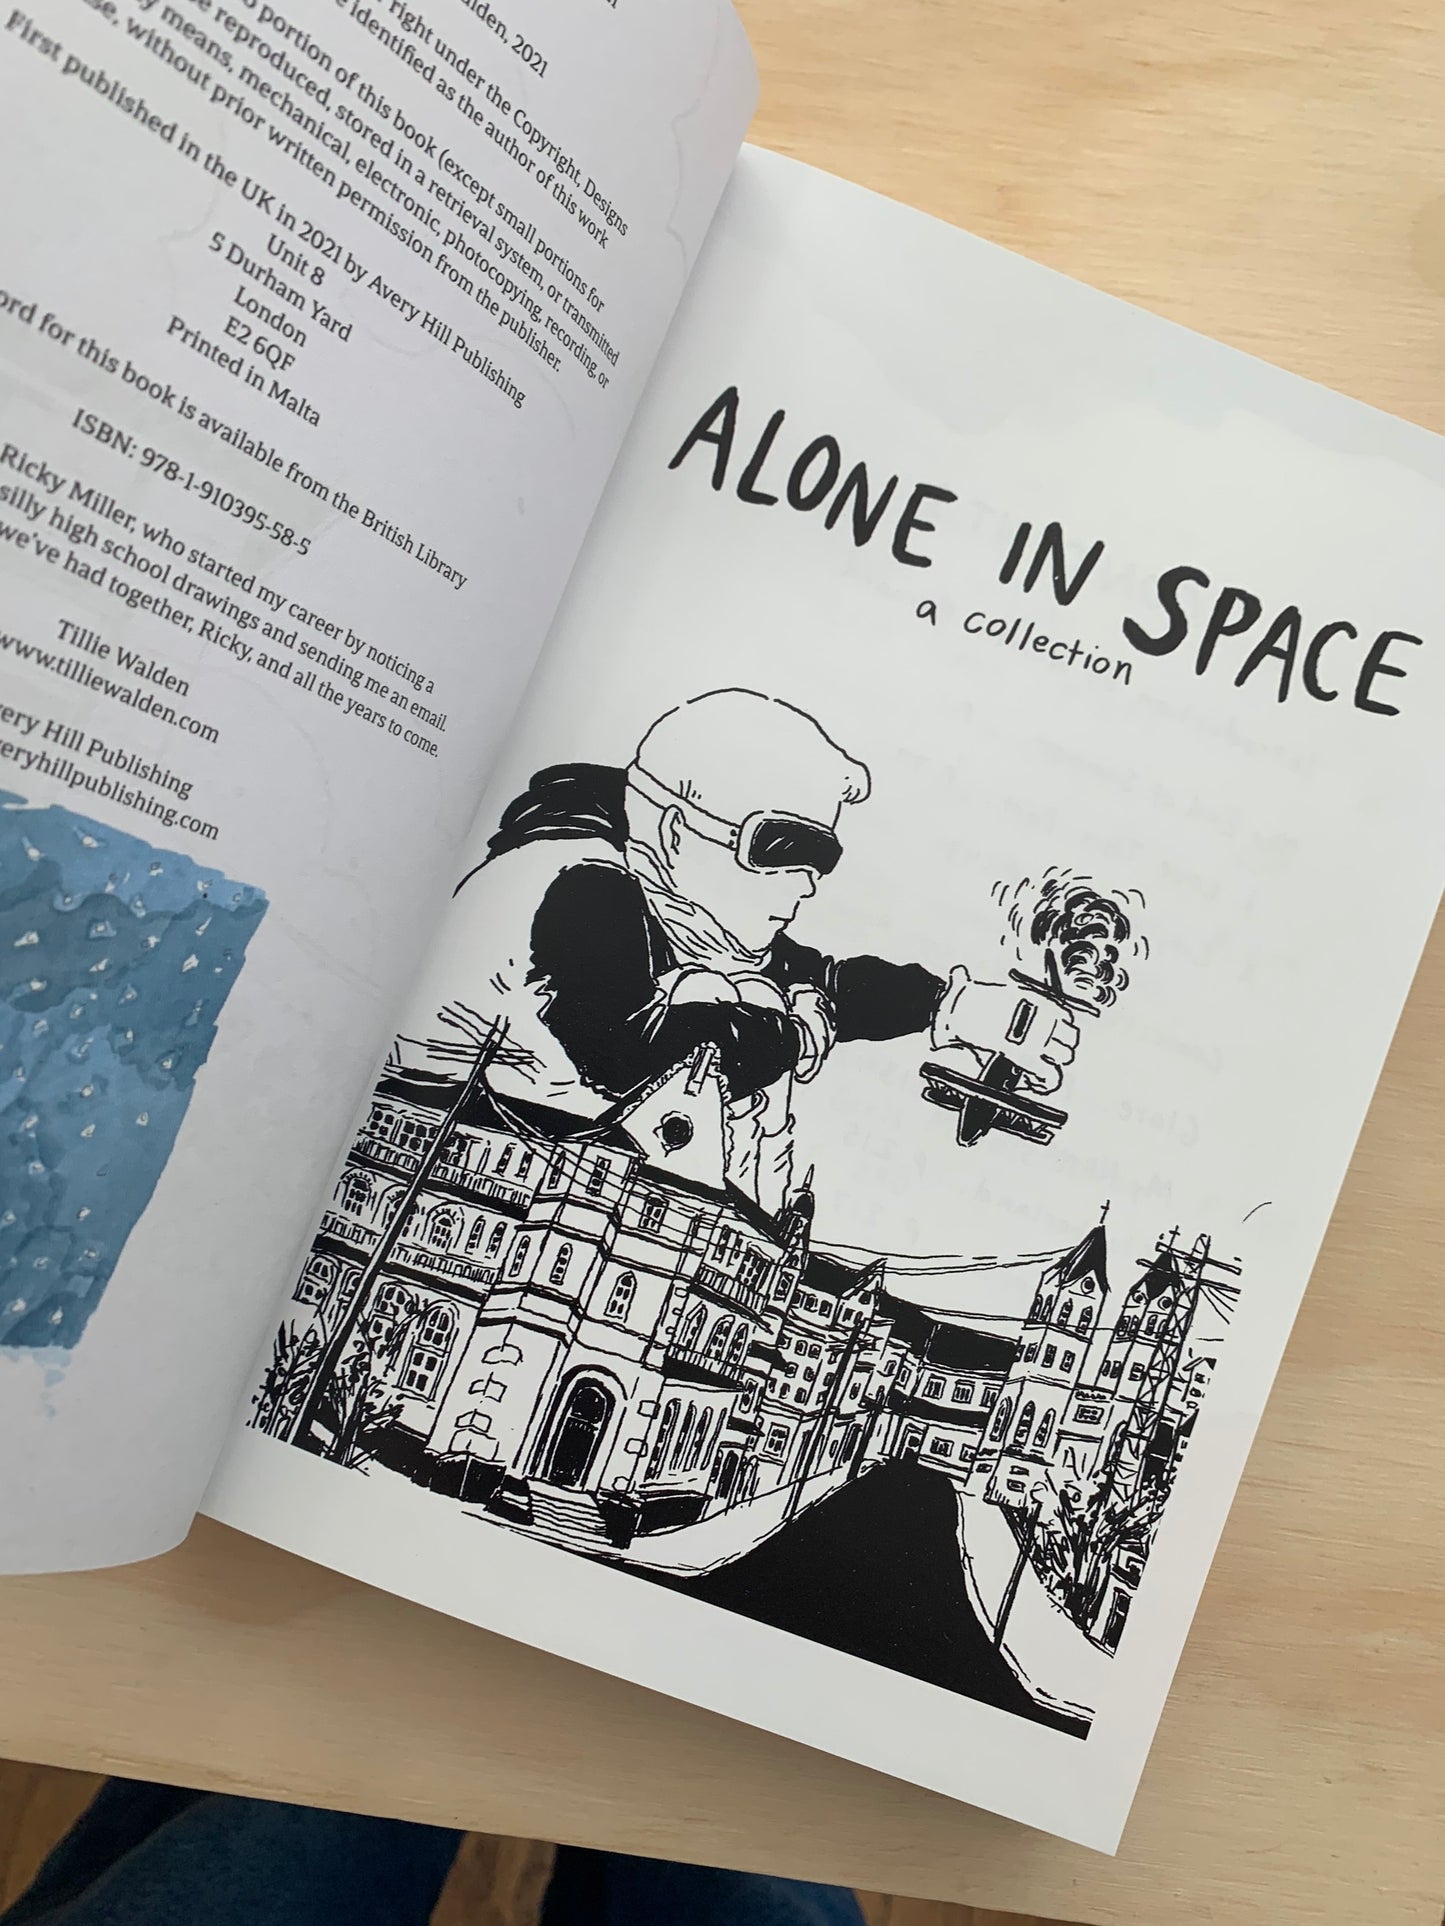 Alone In Space